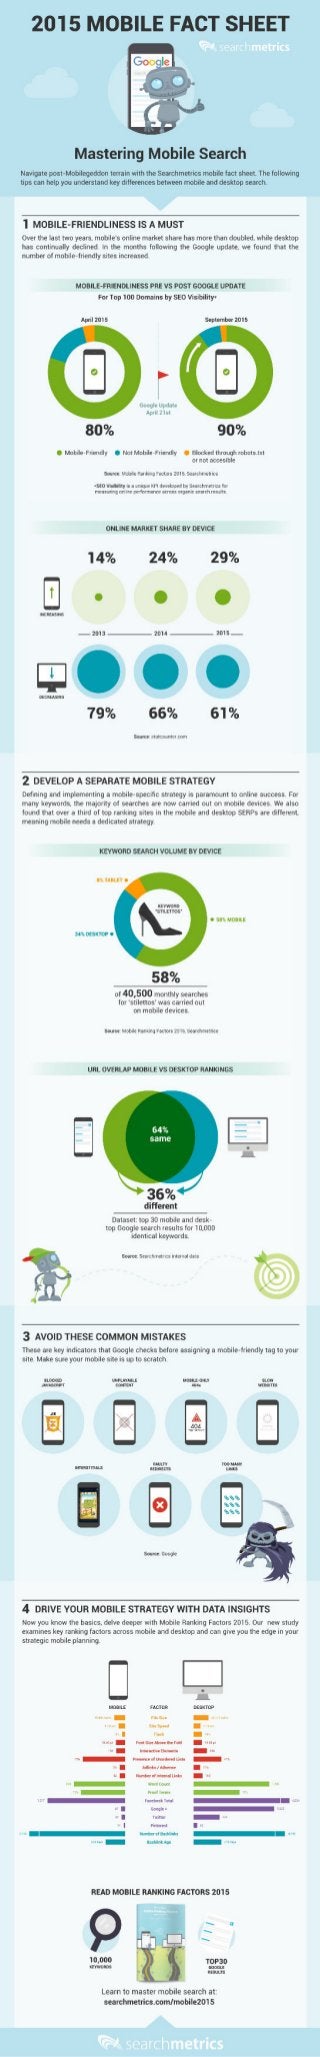 [US] Infographic: 2015 Mobile Fact Sheet 